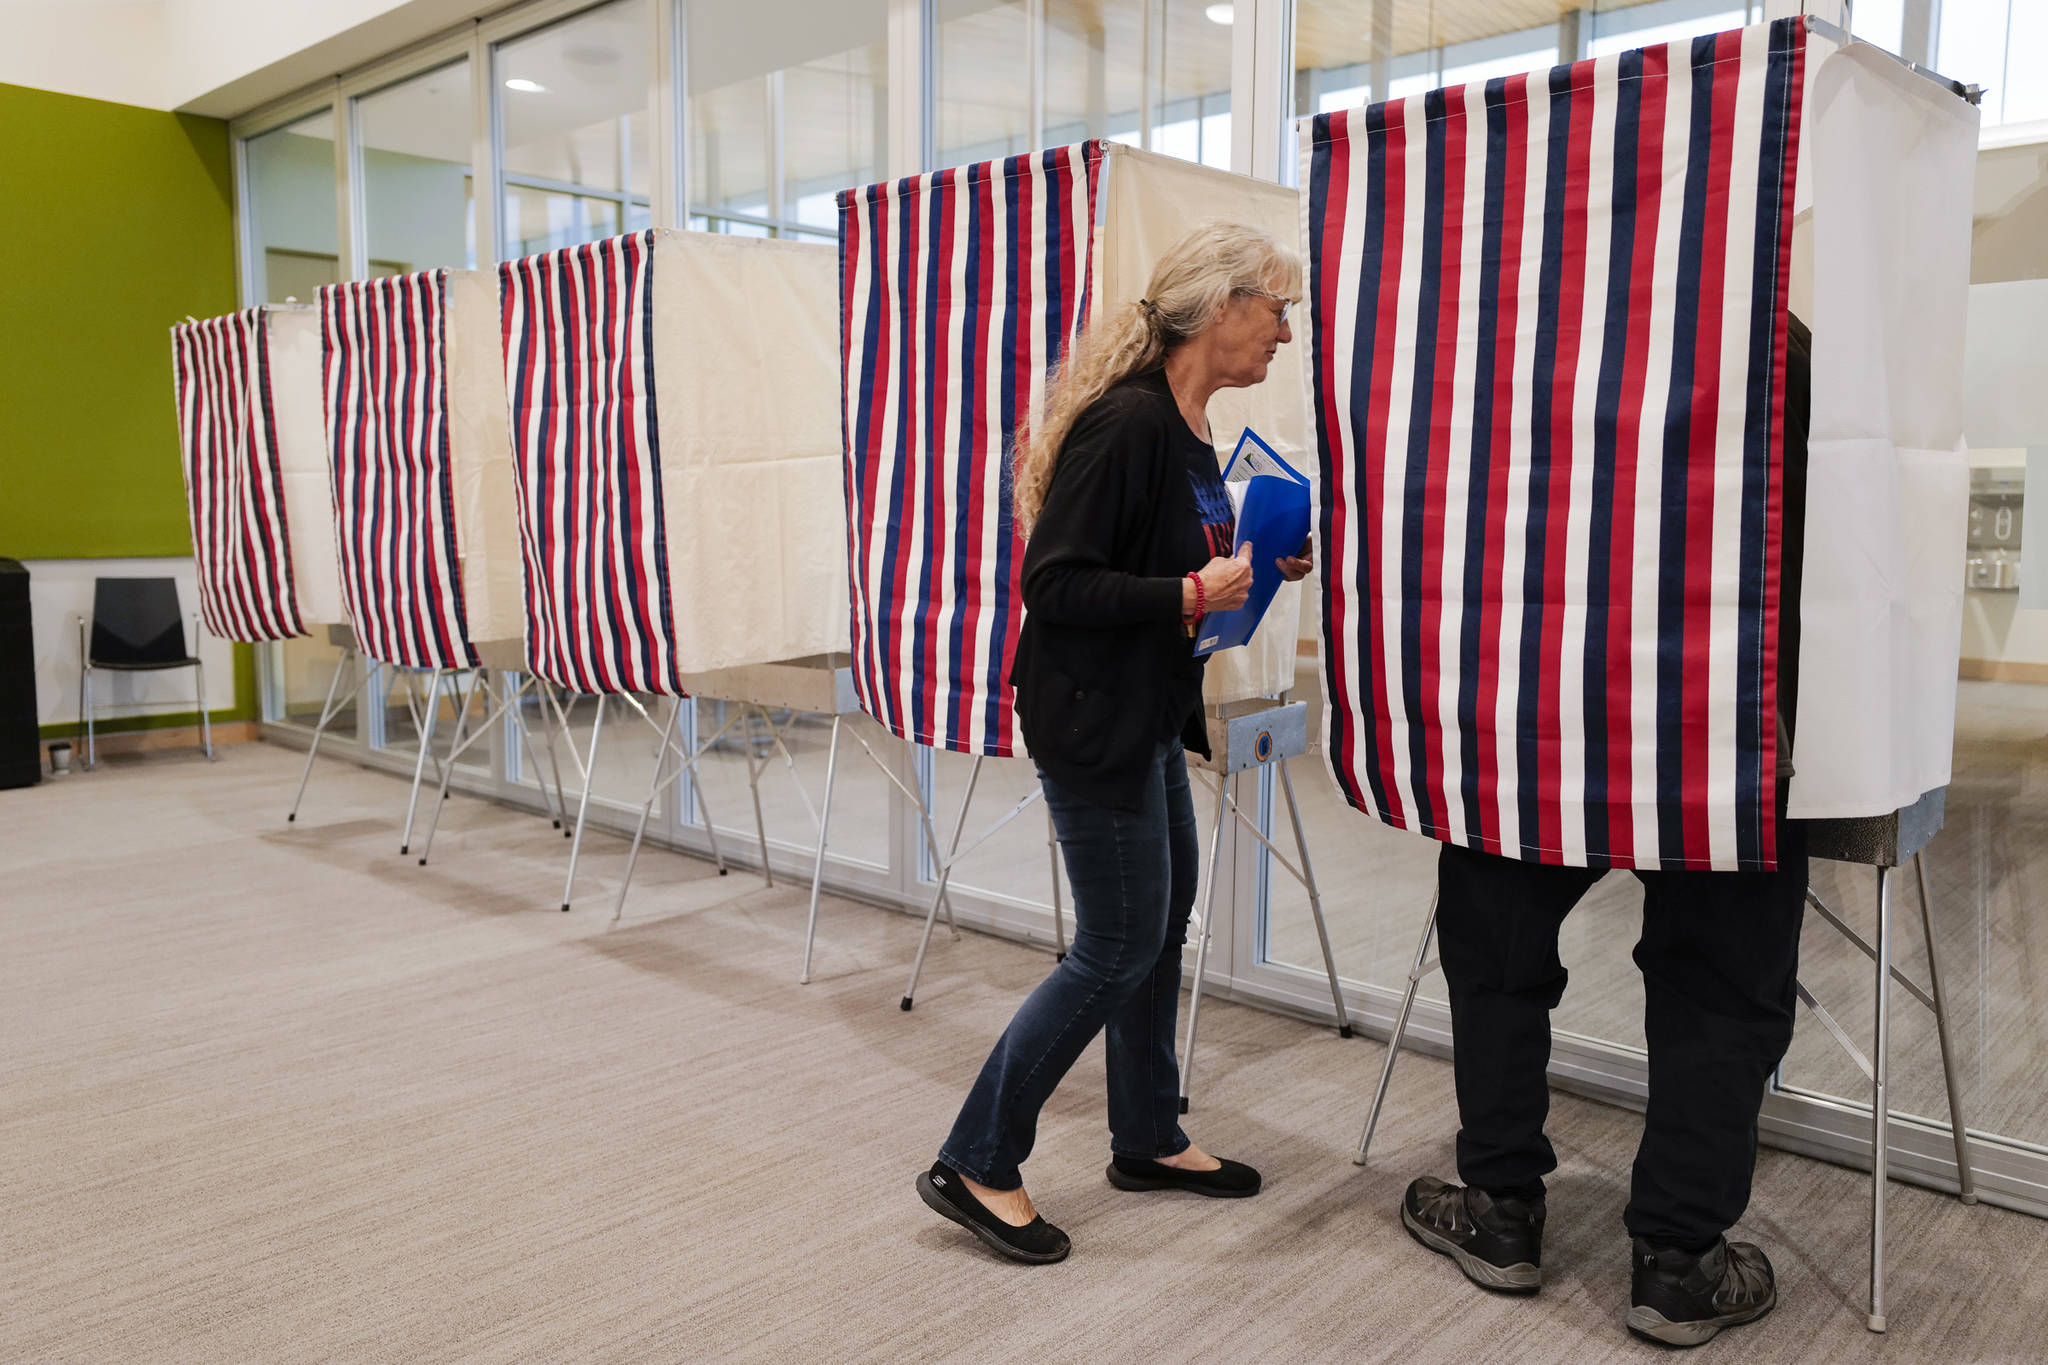 Voter participation turns out to be about average